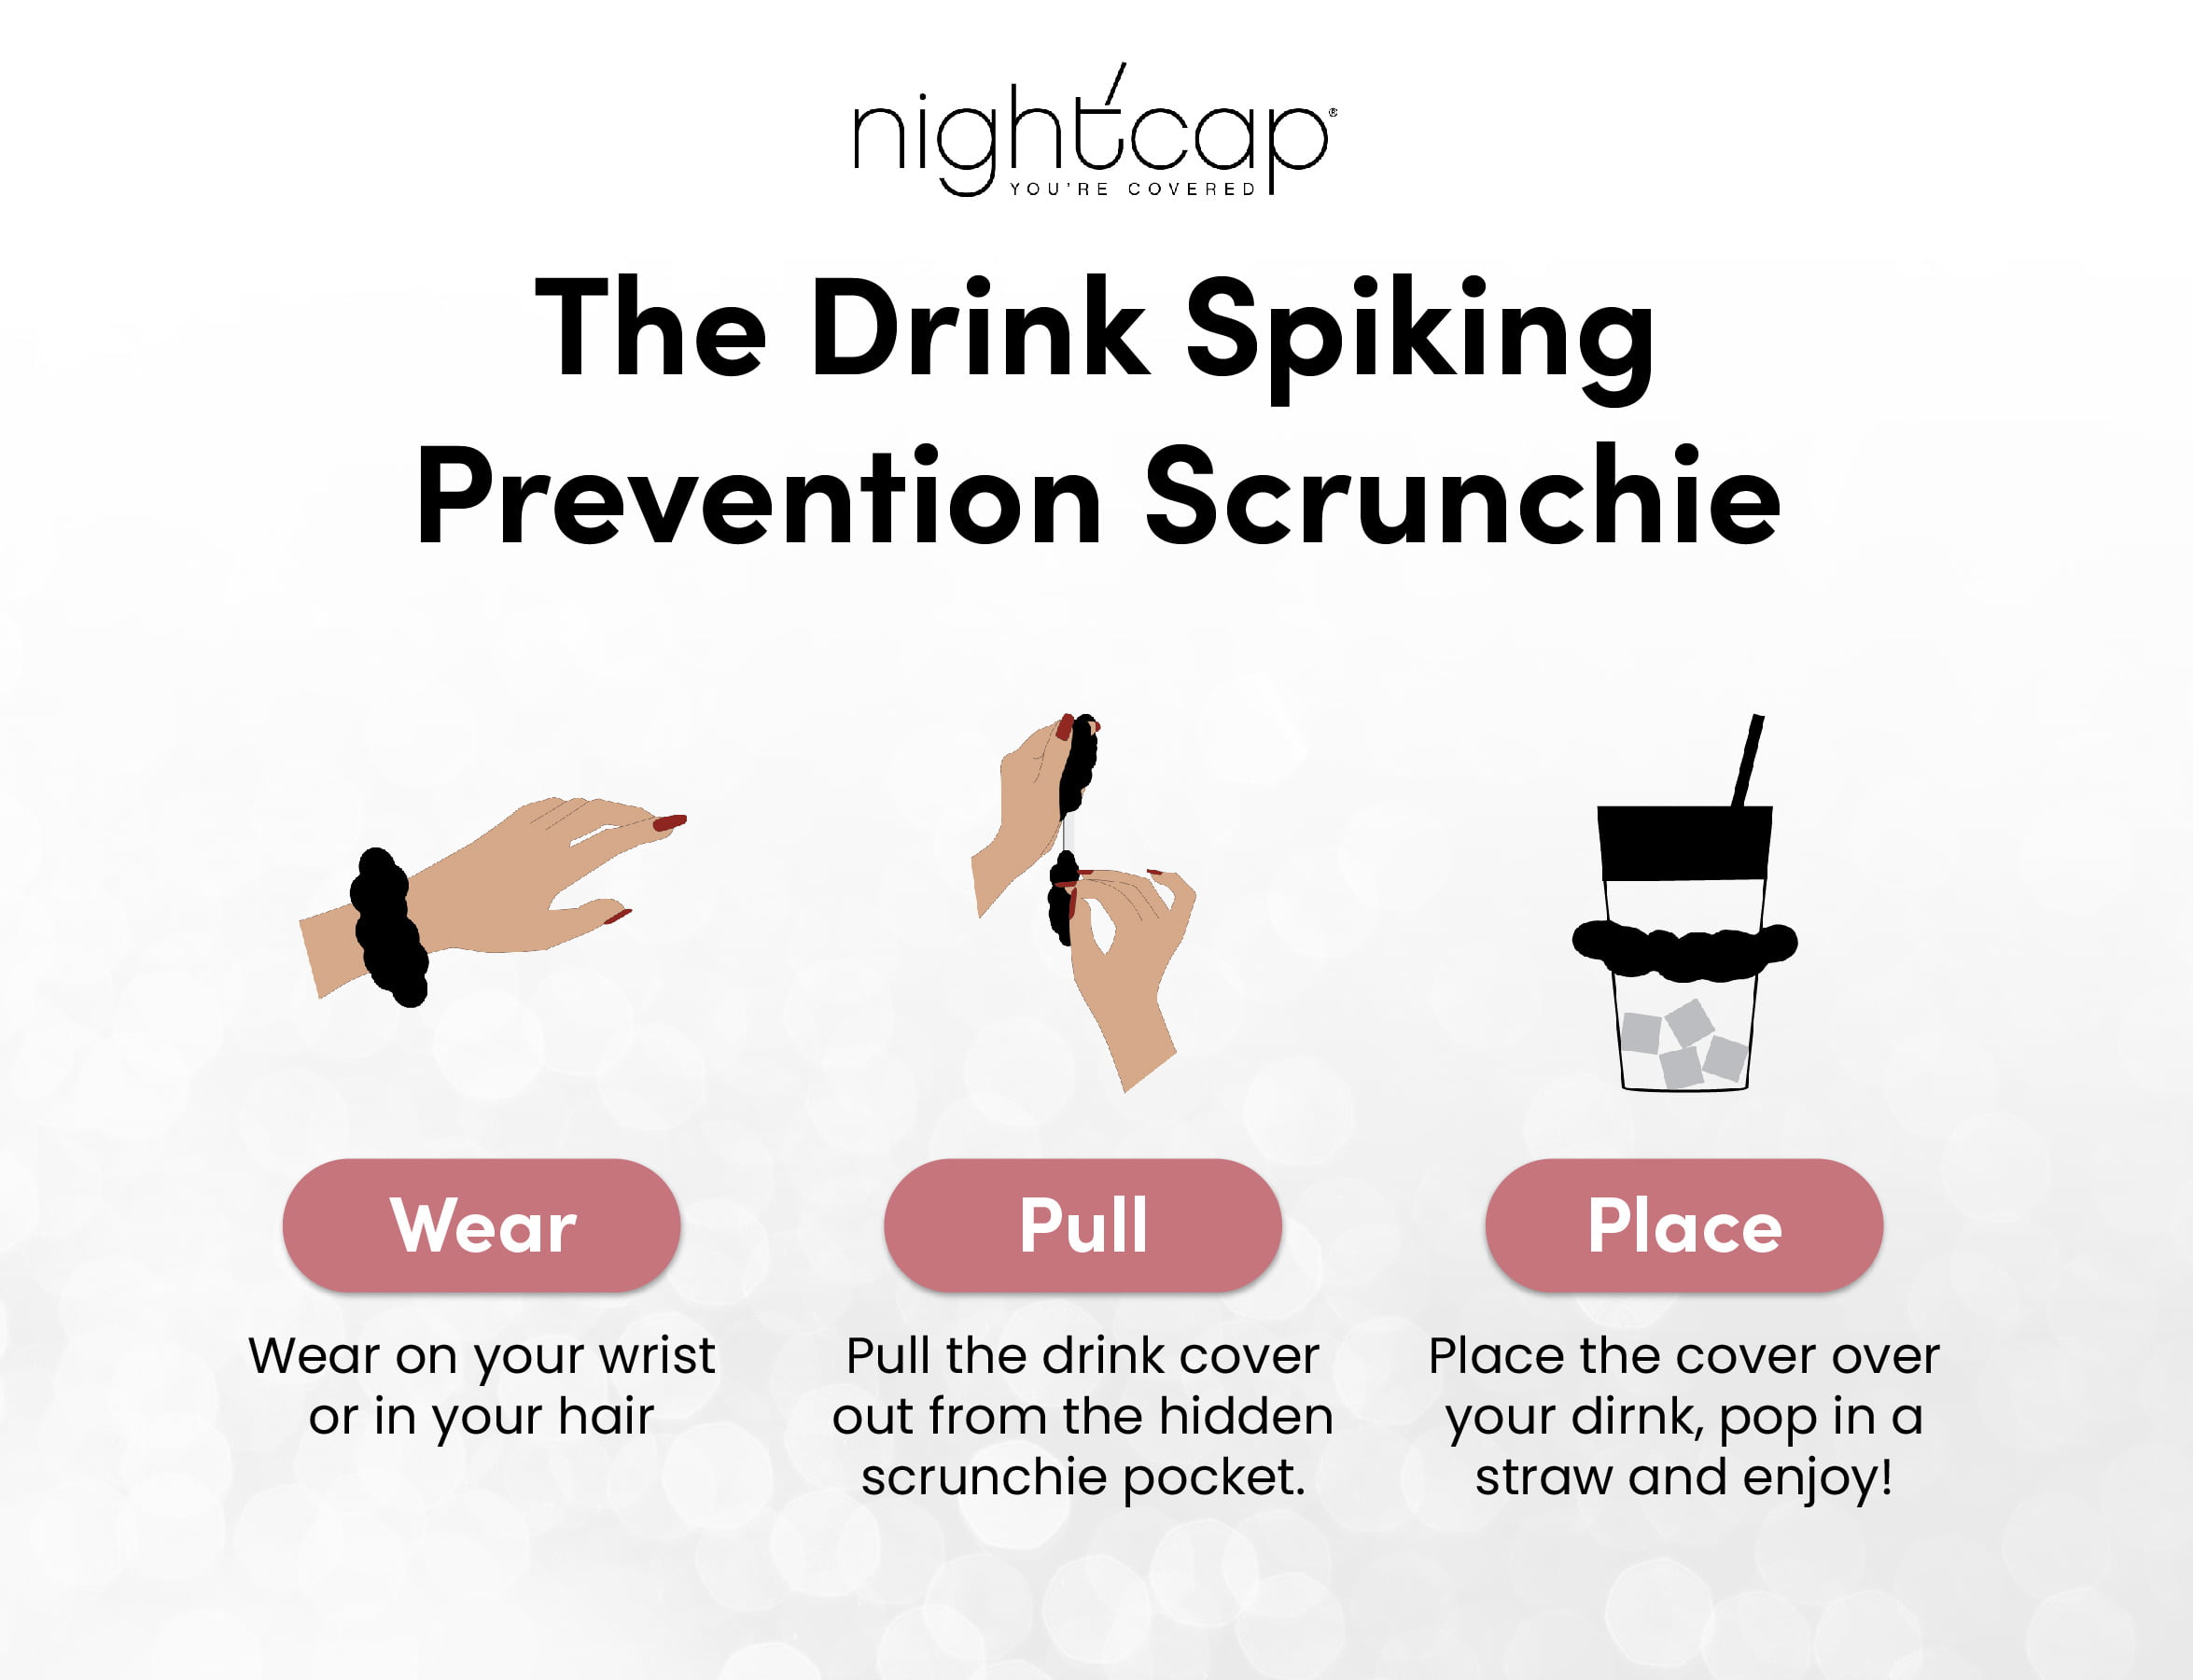 NightCap Scrunchie Reviews - Portable Drink Cover For Spiked Drinks  Protection?